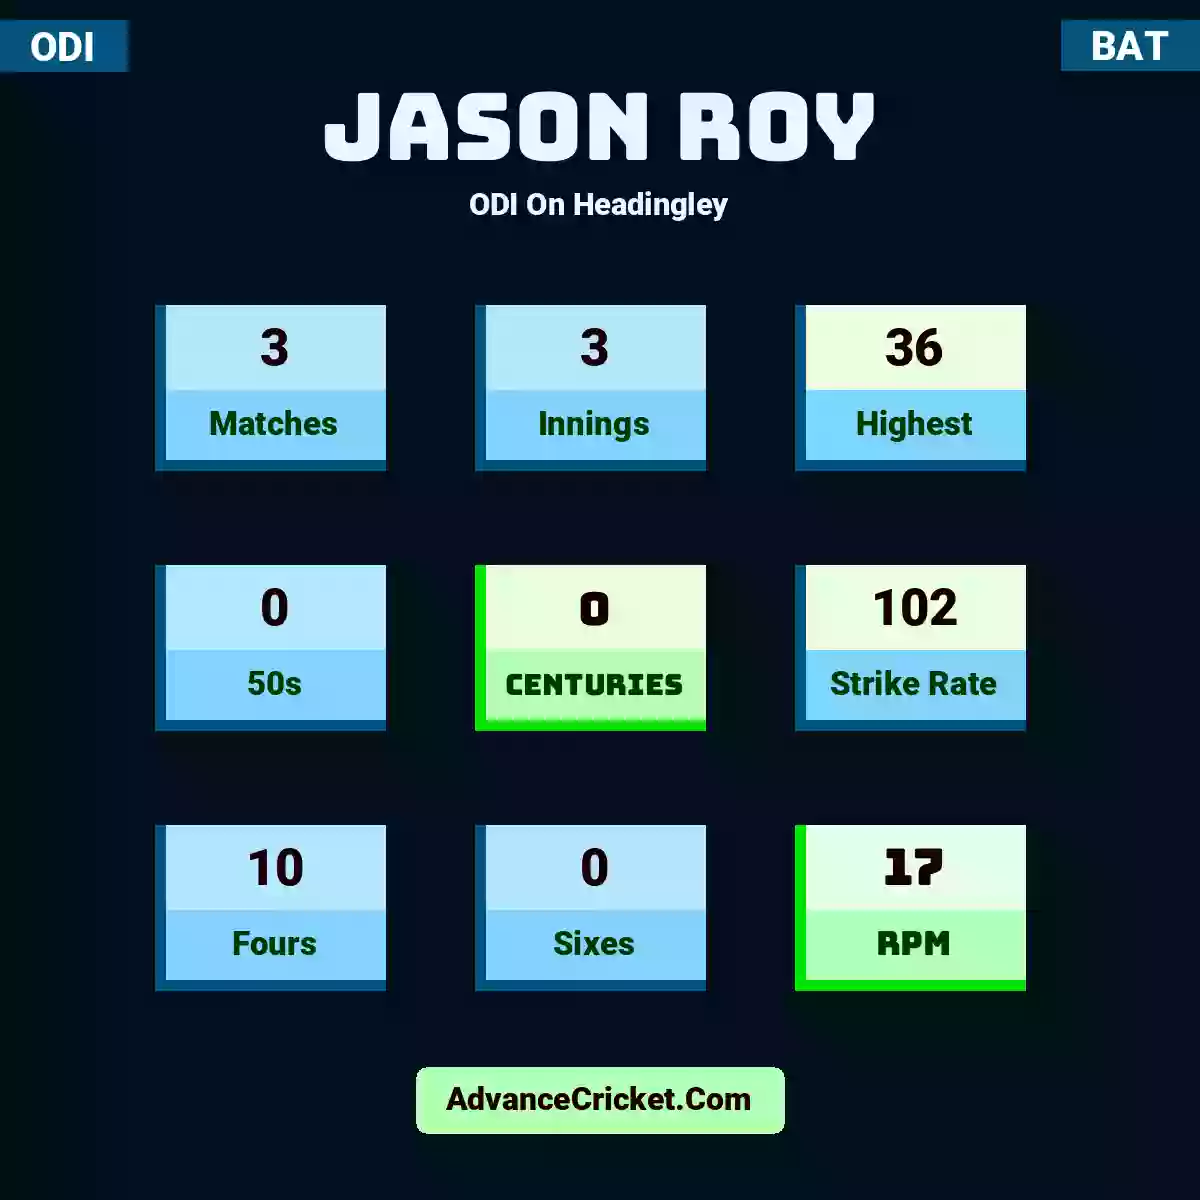 Jason Roy ODI  On Headingley, Jason Roy played 3 matches, scored 36 runs as highest, 0 half-centuries, and 0 centuries, with a strike rate of 102. J.Roy hit 10 fours and 0 sixes, with an RPM of 17.